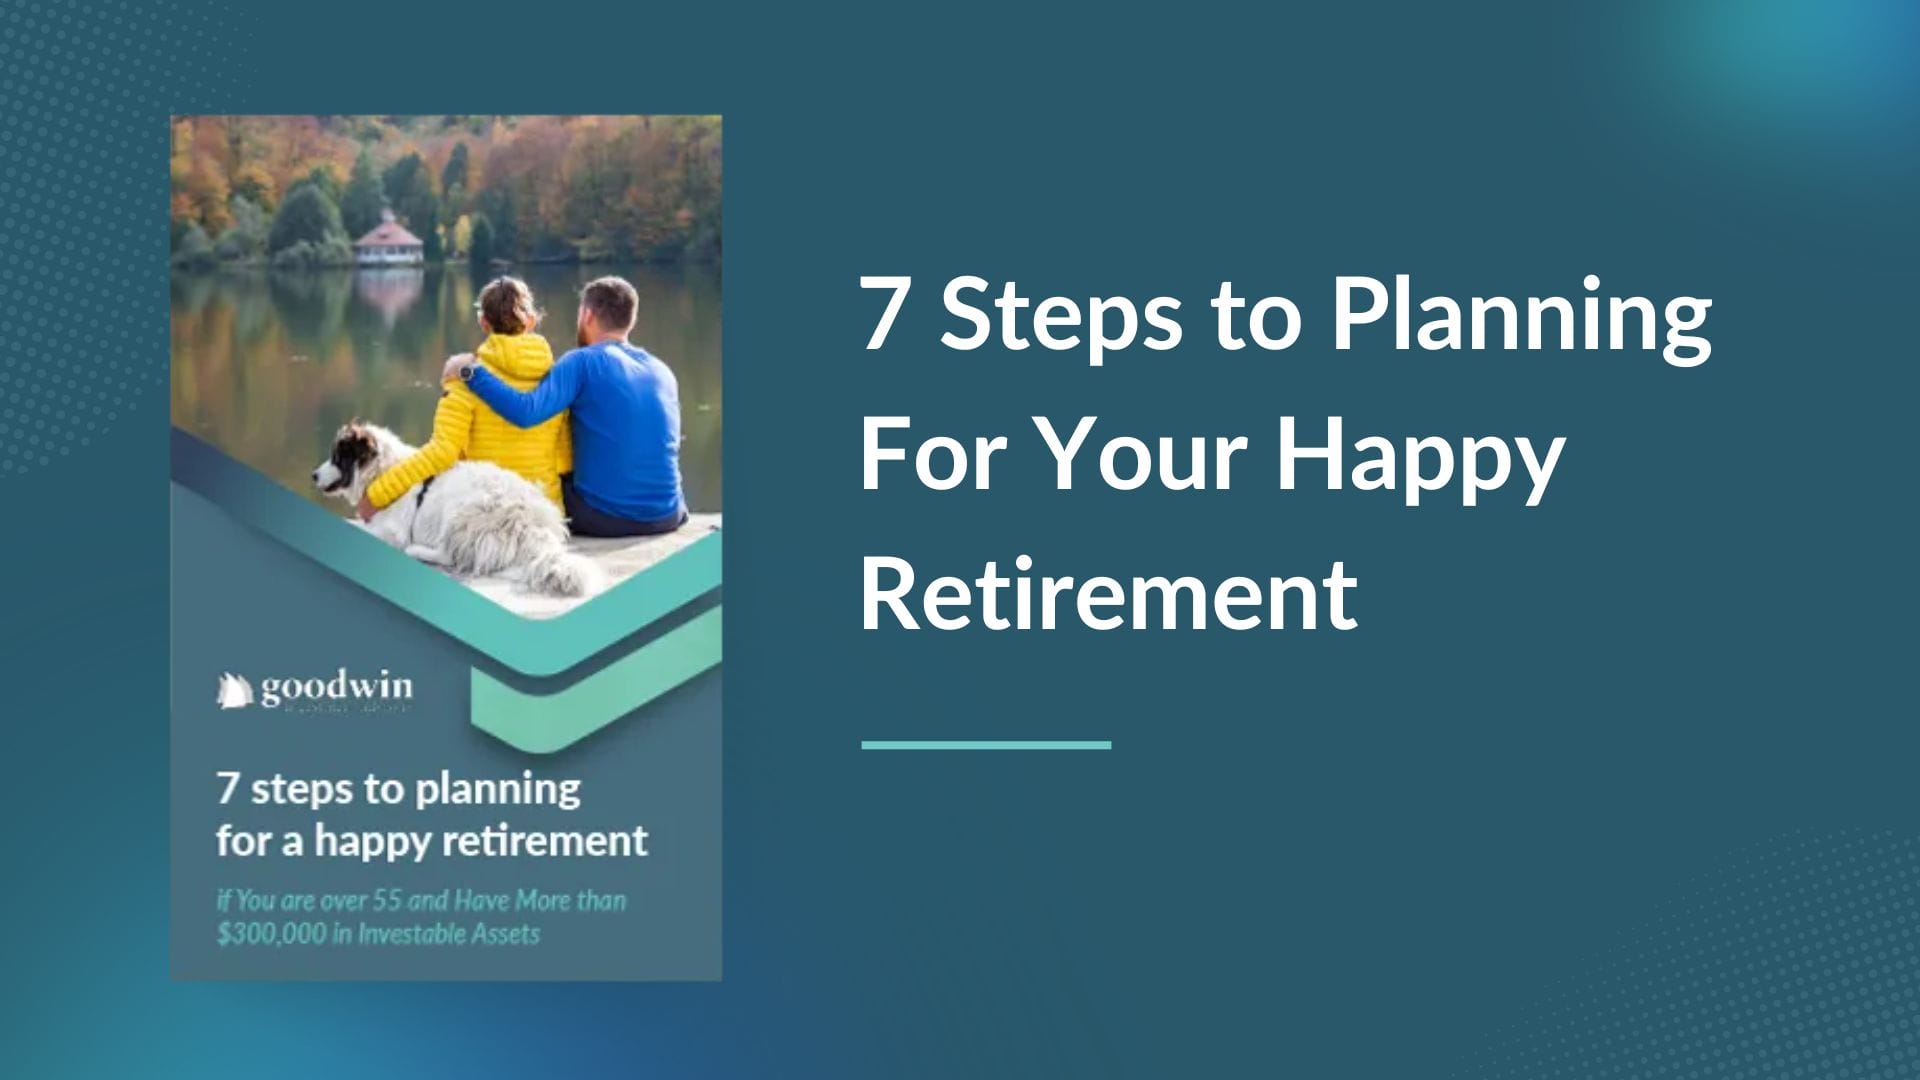 7 Steps to Planning For Your Happy Retirement